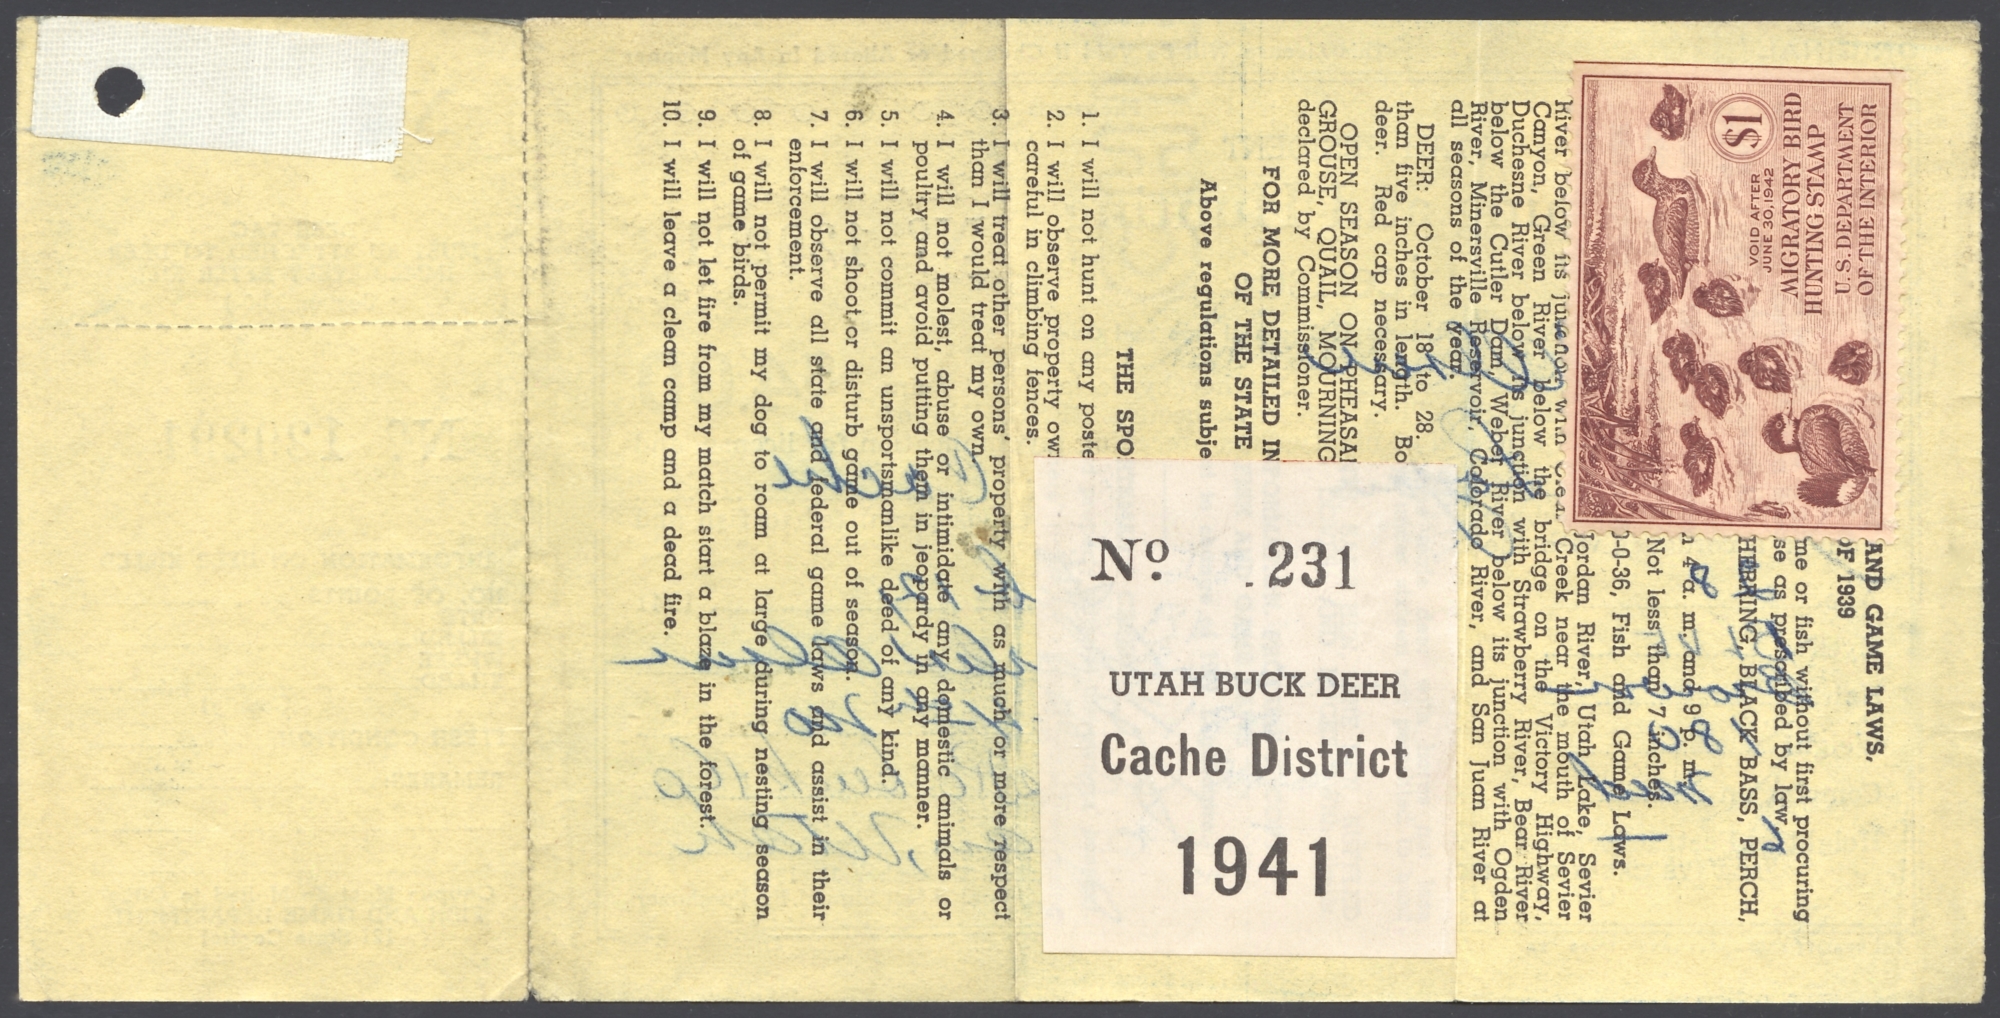 1941 Utah Buck Deer - Cache District on license with 1941-42 Federal Waterfowl Stamp 